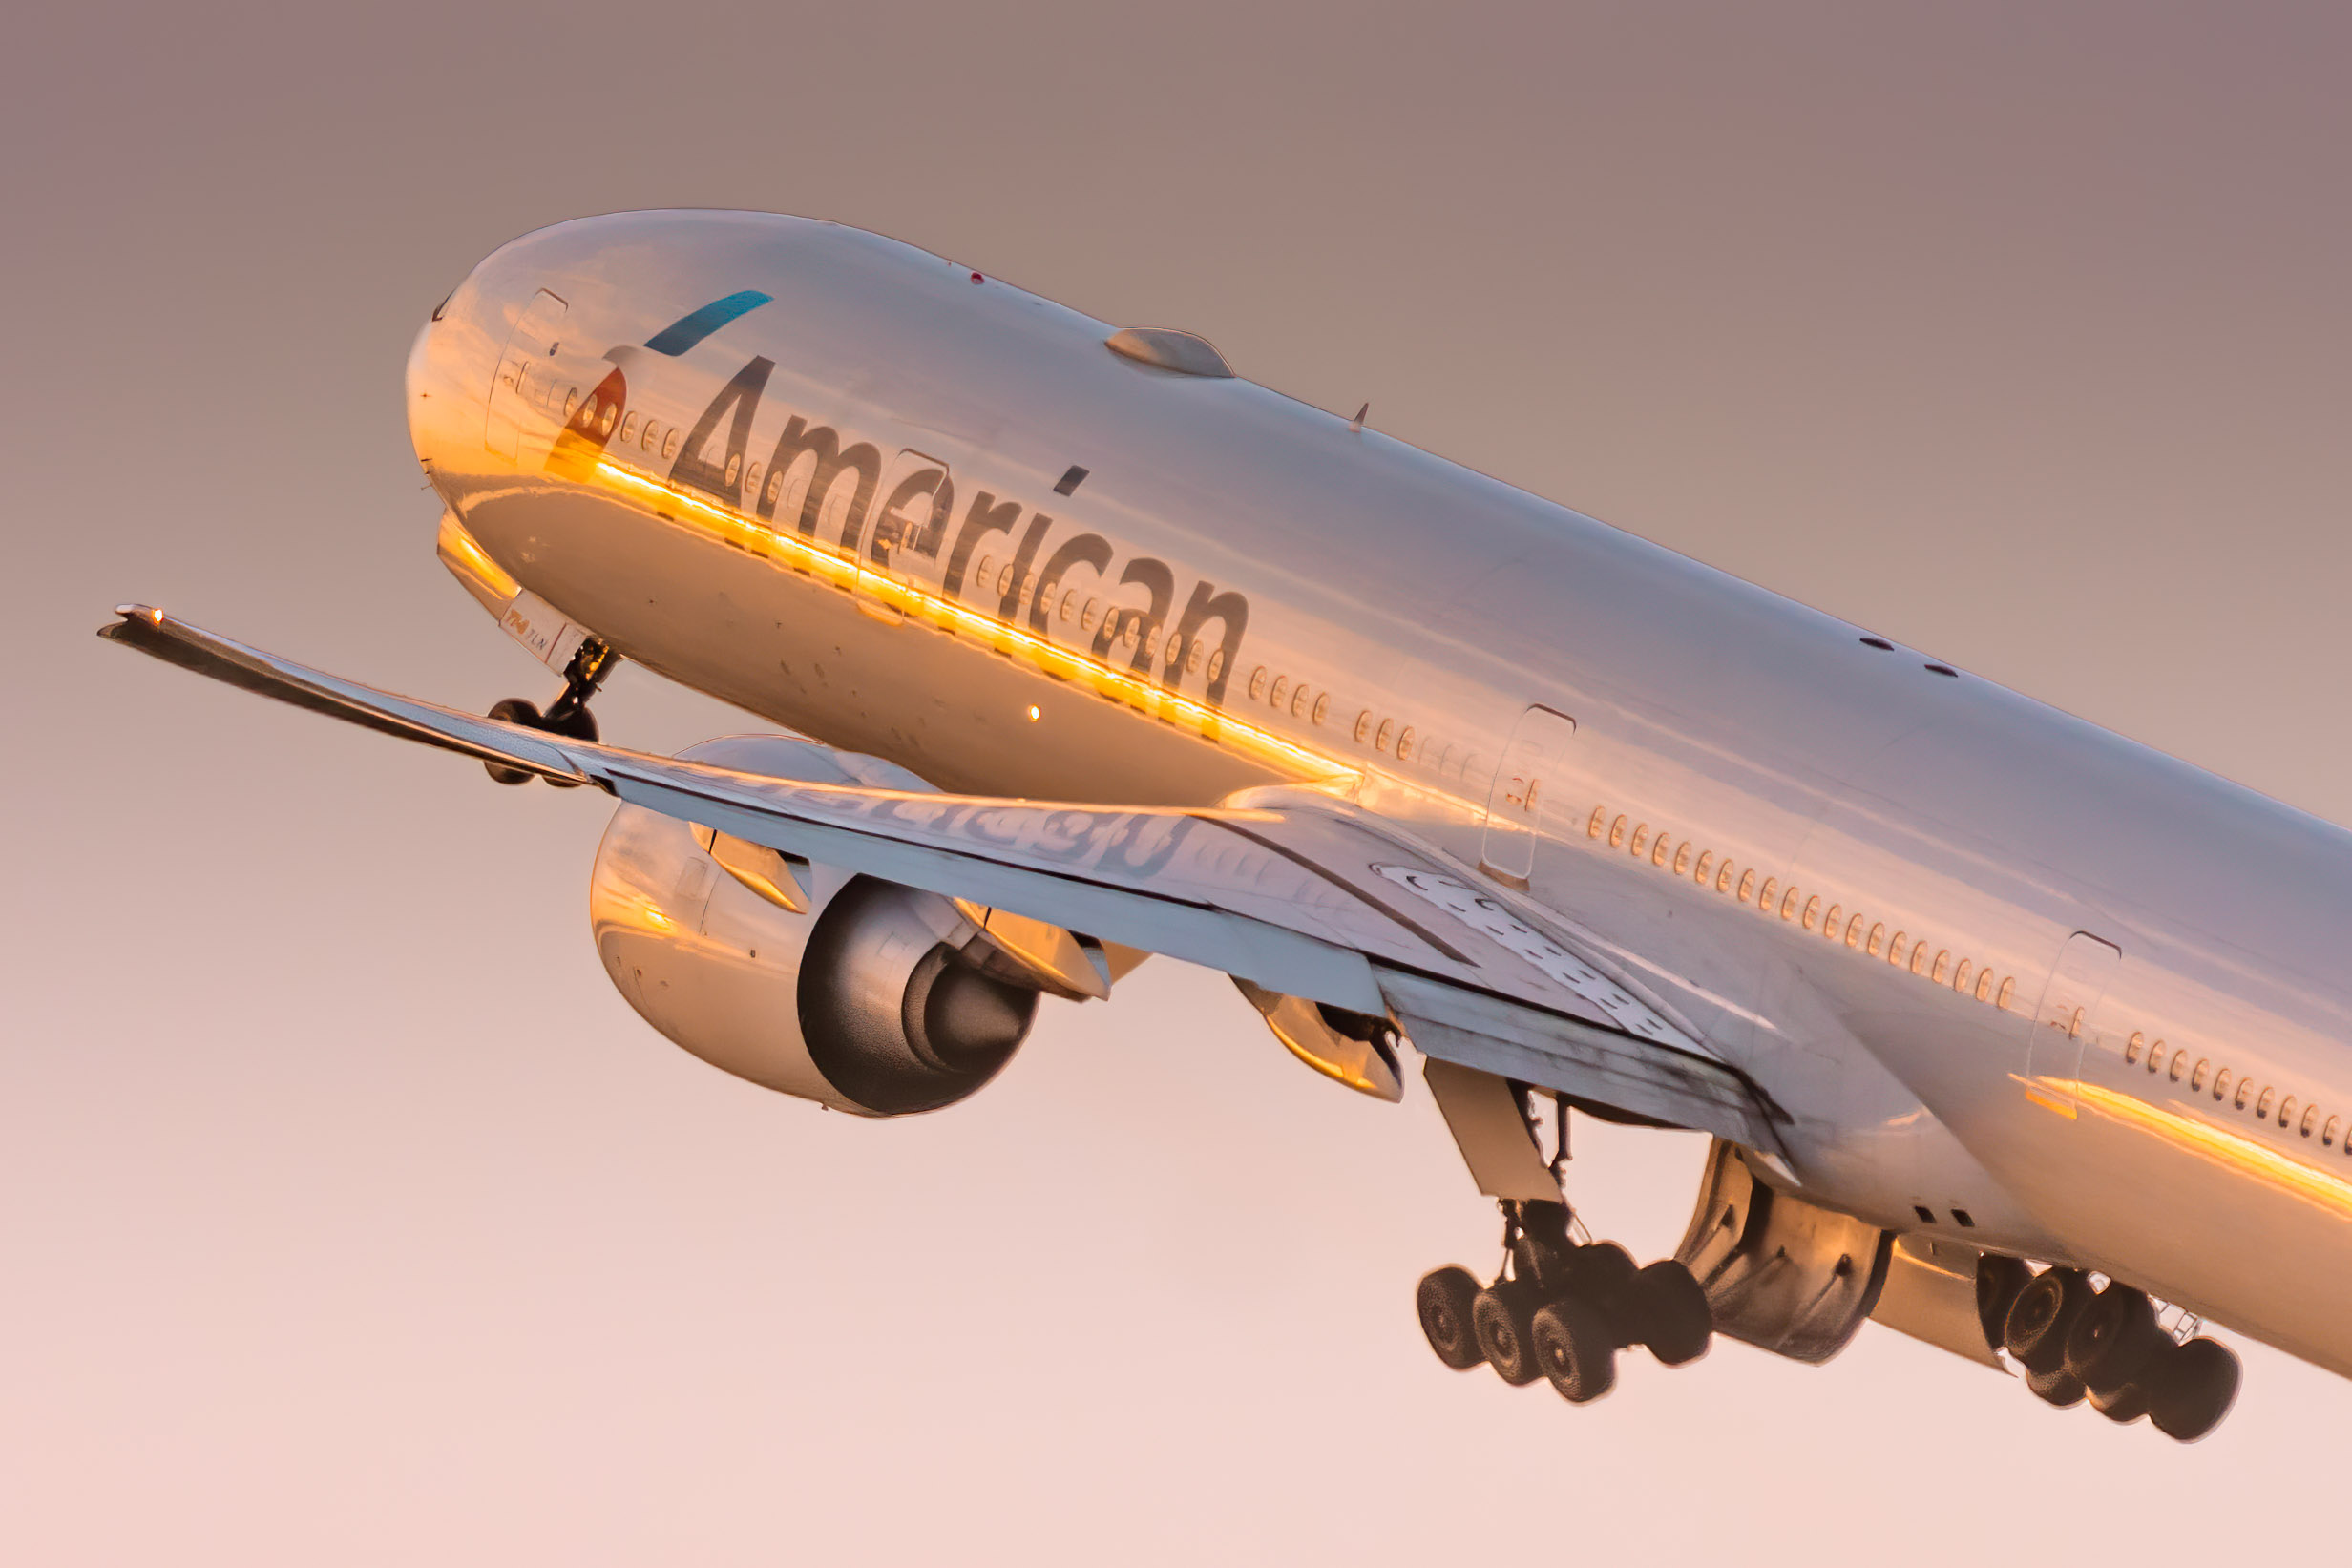 American Overtakes Delta As Busiest Airline in the World